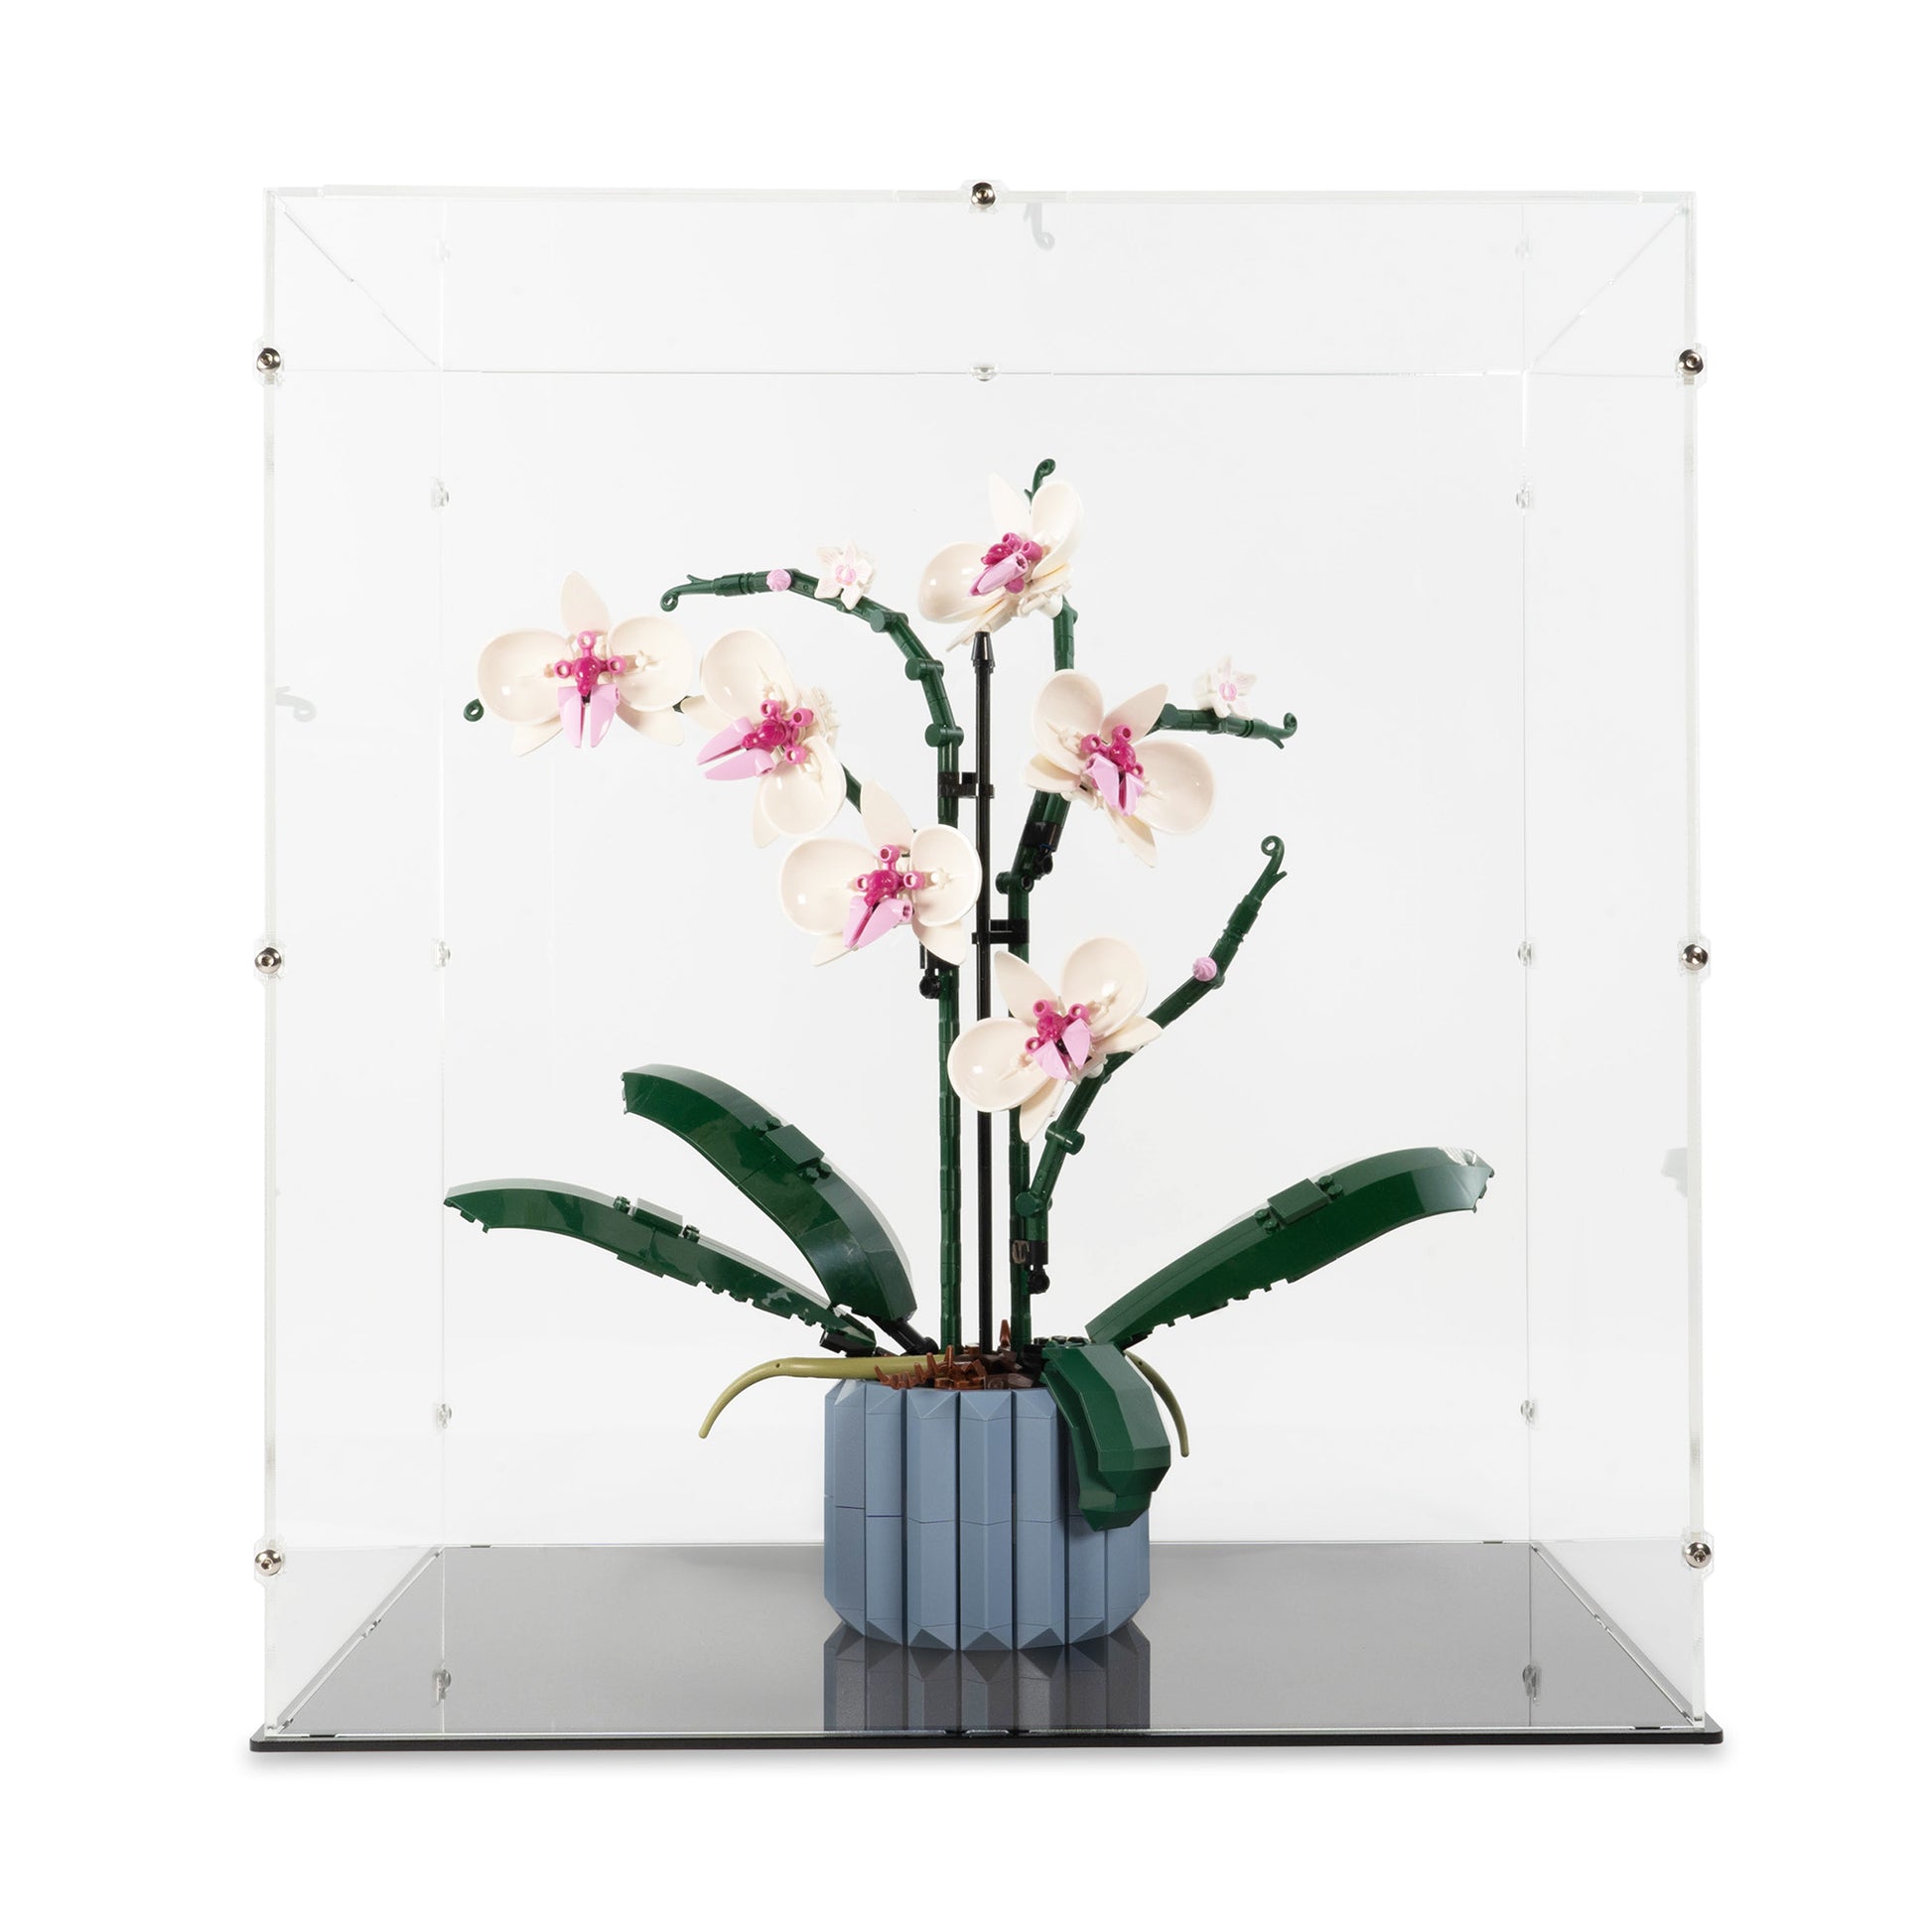 Acrylic Display Case for LEGO Orchid